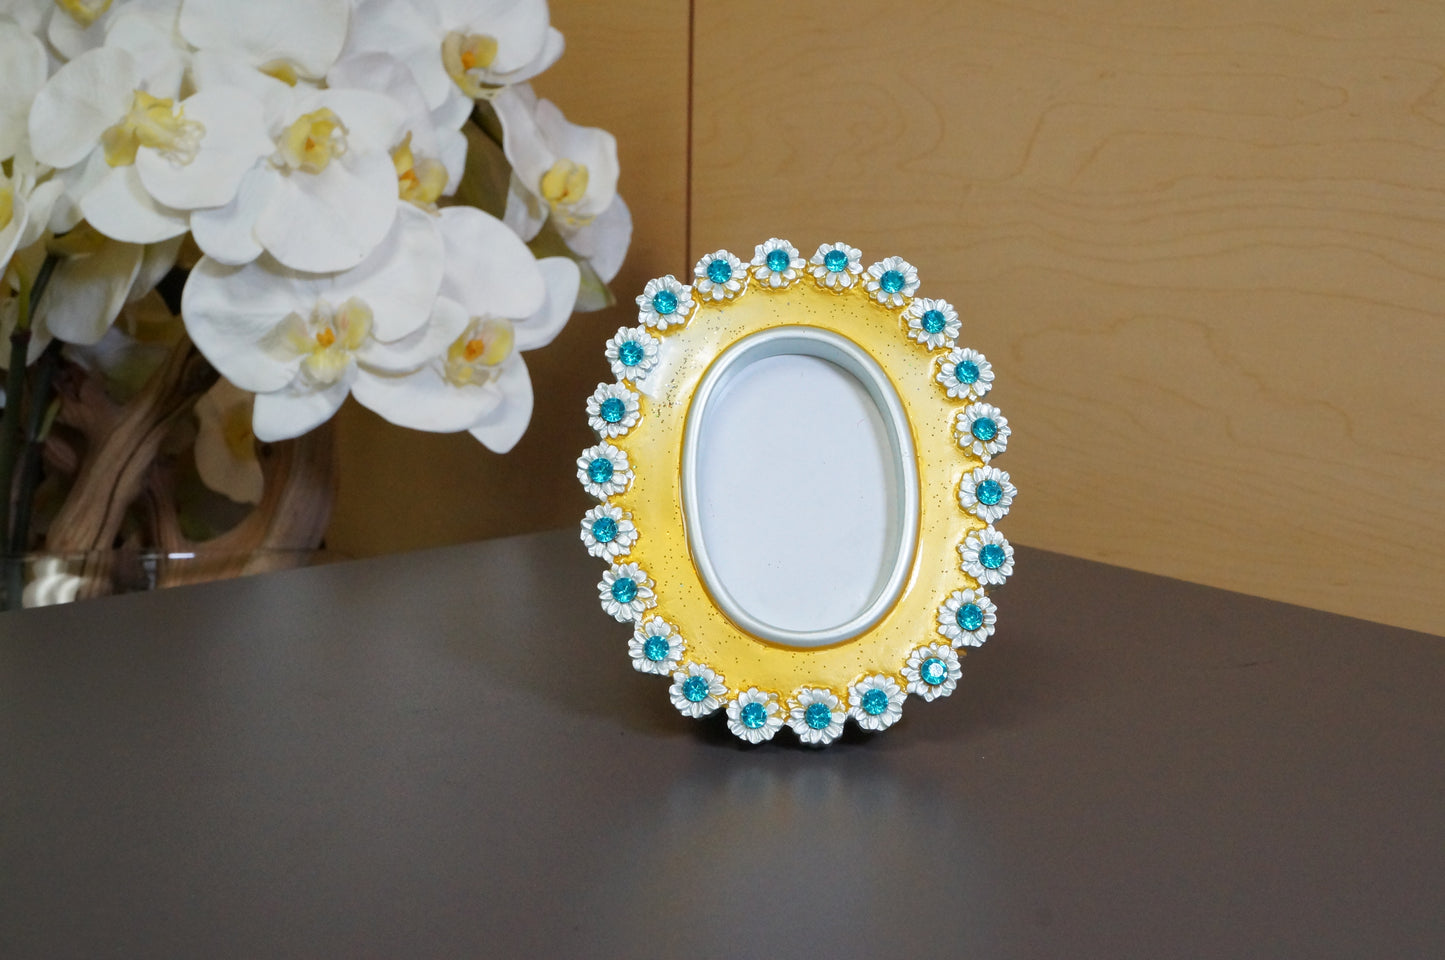 Oval Shaped Acrylic Flower Details Free Standing Desk Photo Frame 1.75"x2.75"